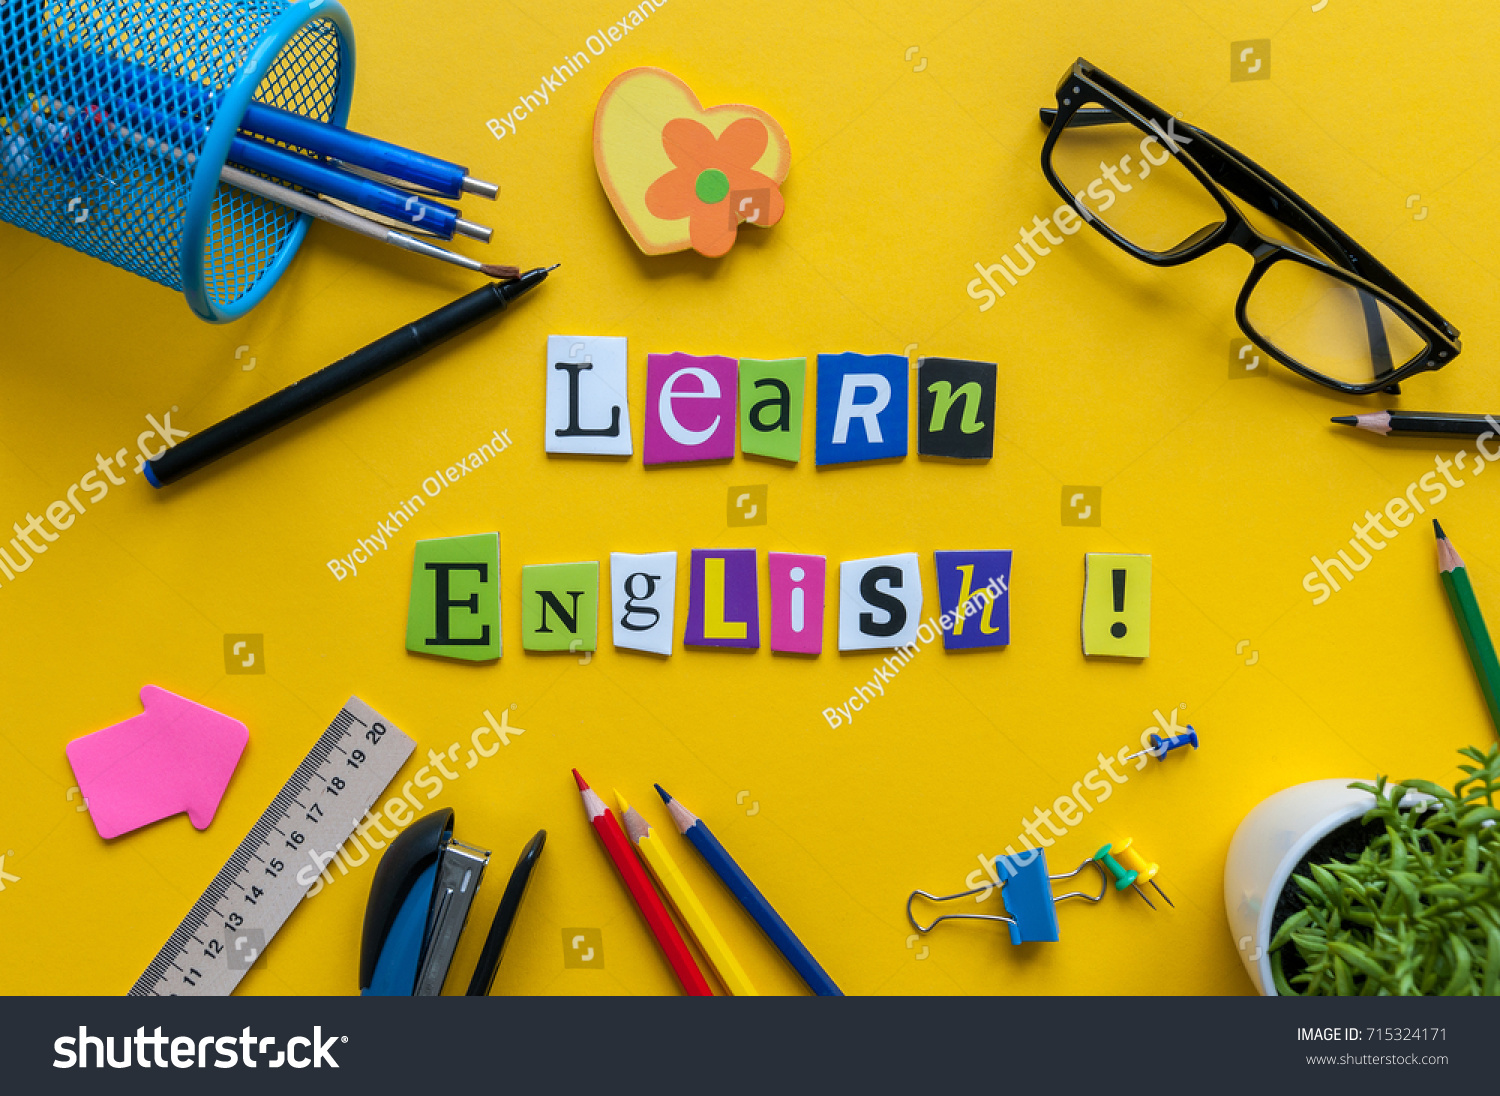 Word LEARN ENGLISH made with carved letters onyellow desk with office or school supplies, stationery. Concept of English language courses #715324171